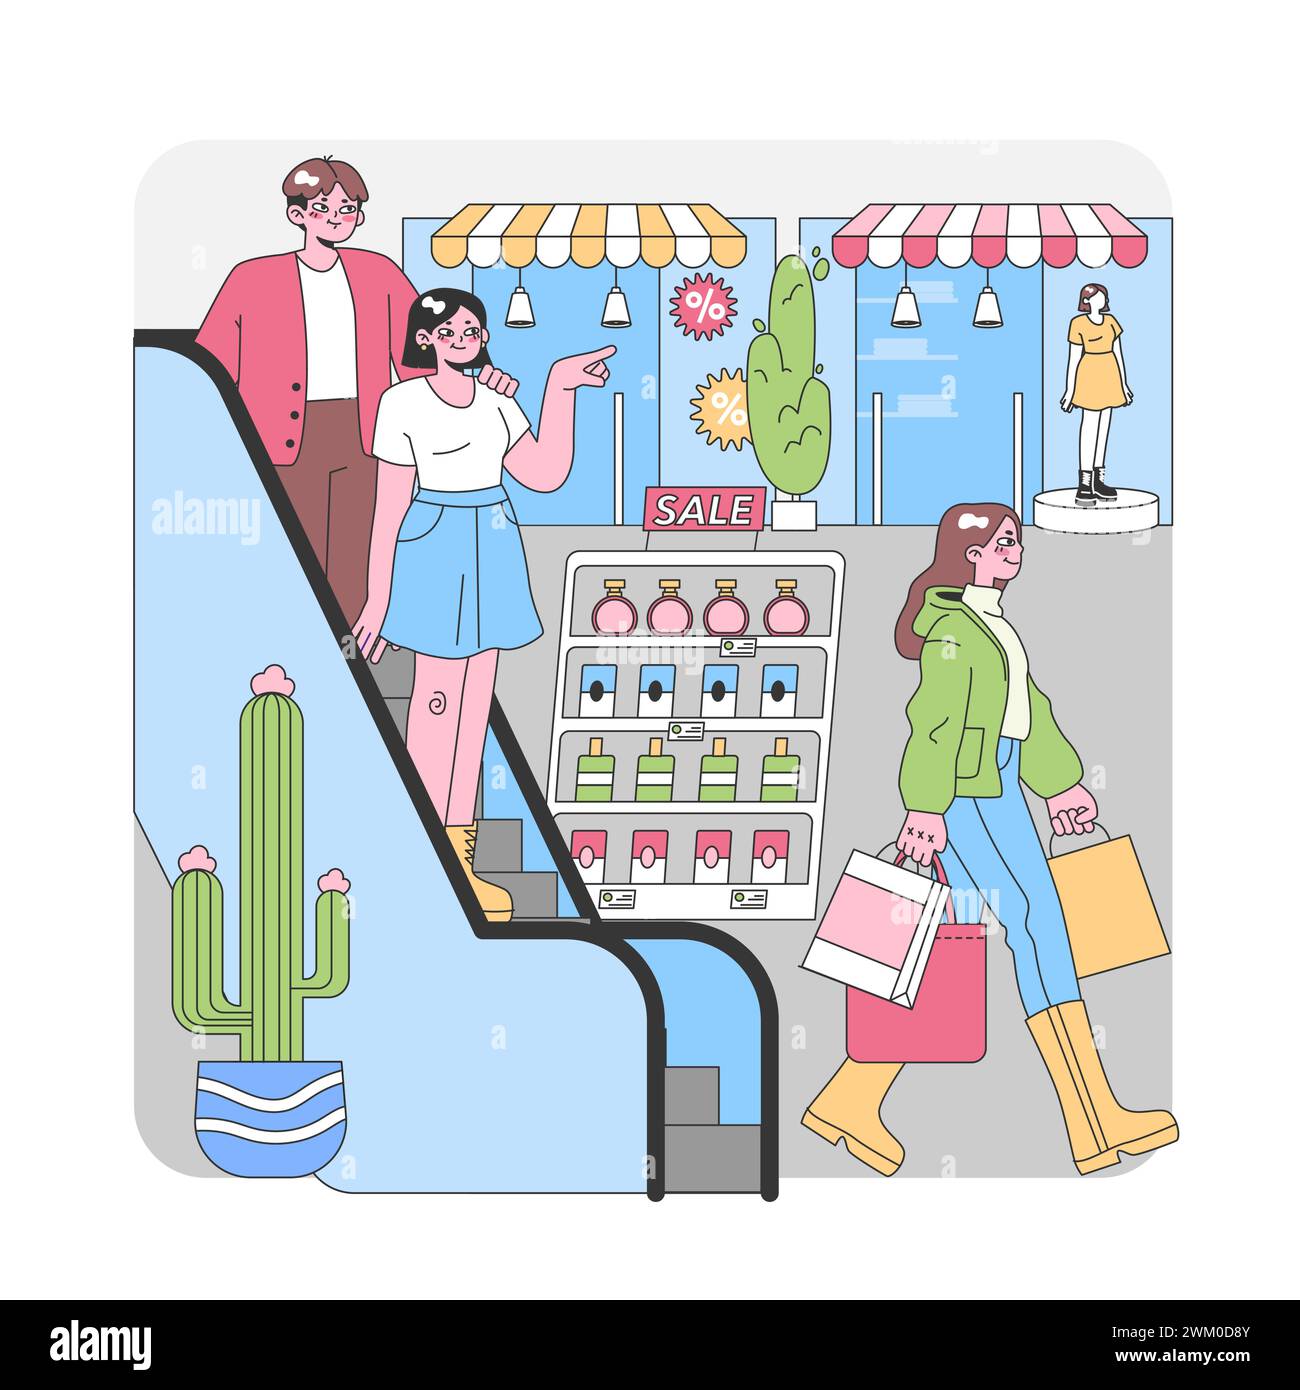 Vibrant Shopping Day Scene. Shoppers explore a lively market with stalls, while a woman confidently strides with her purchases. Sales, boutique stalls, and relaxed browsing. Flat vector illustration. Stock Vector